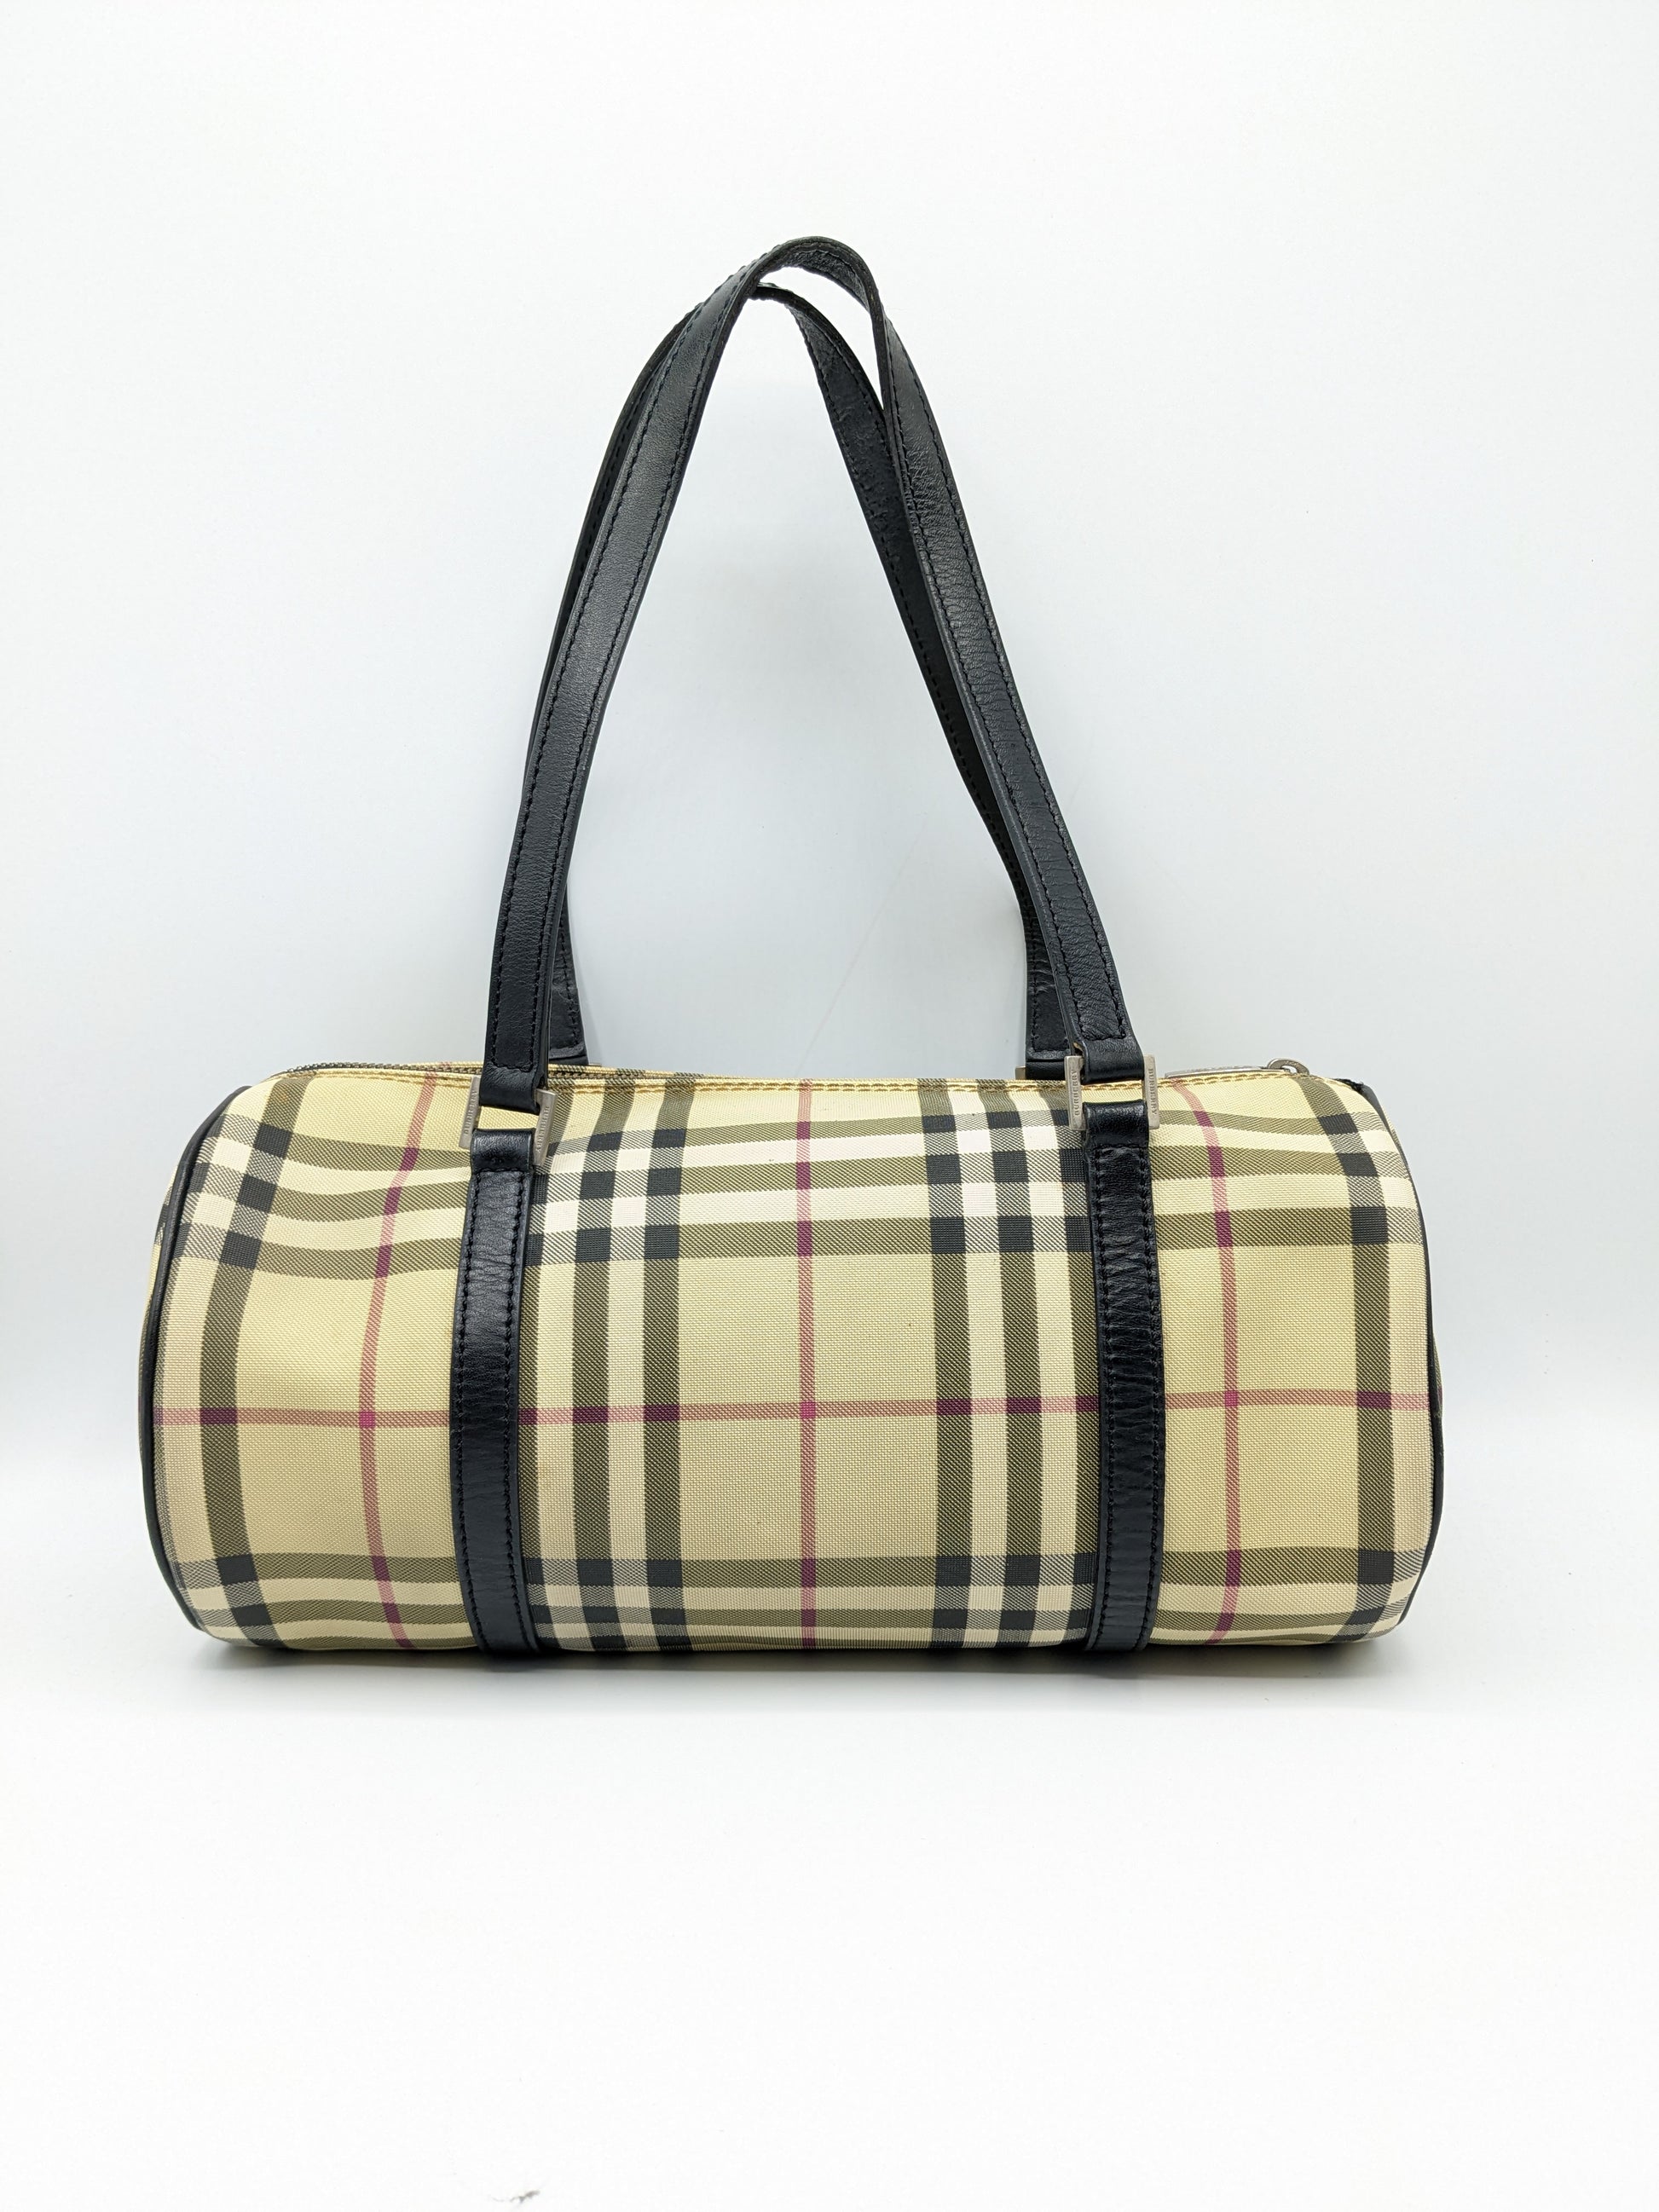 Burberry Shoulder Bags for Women, Authenticity Guaranteed